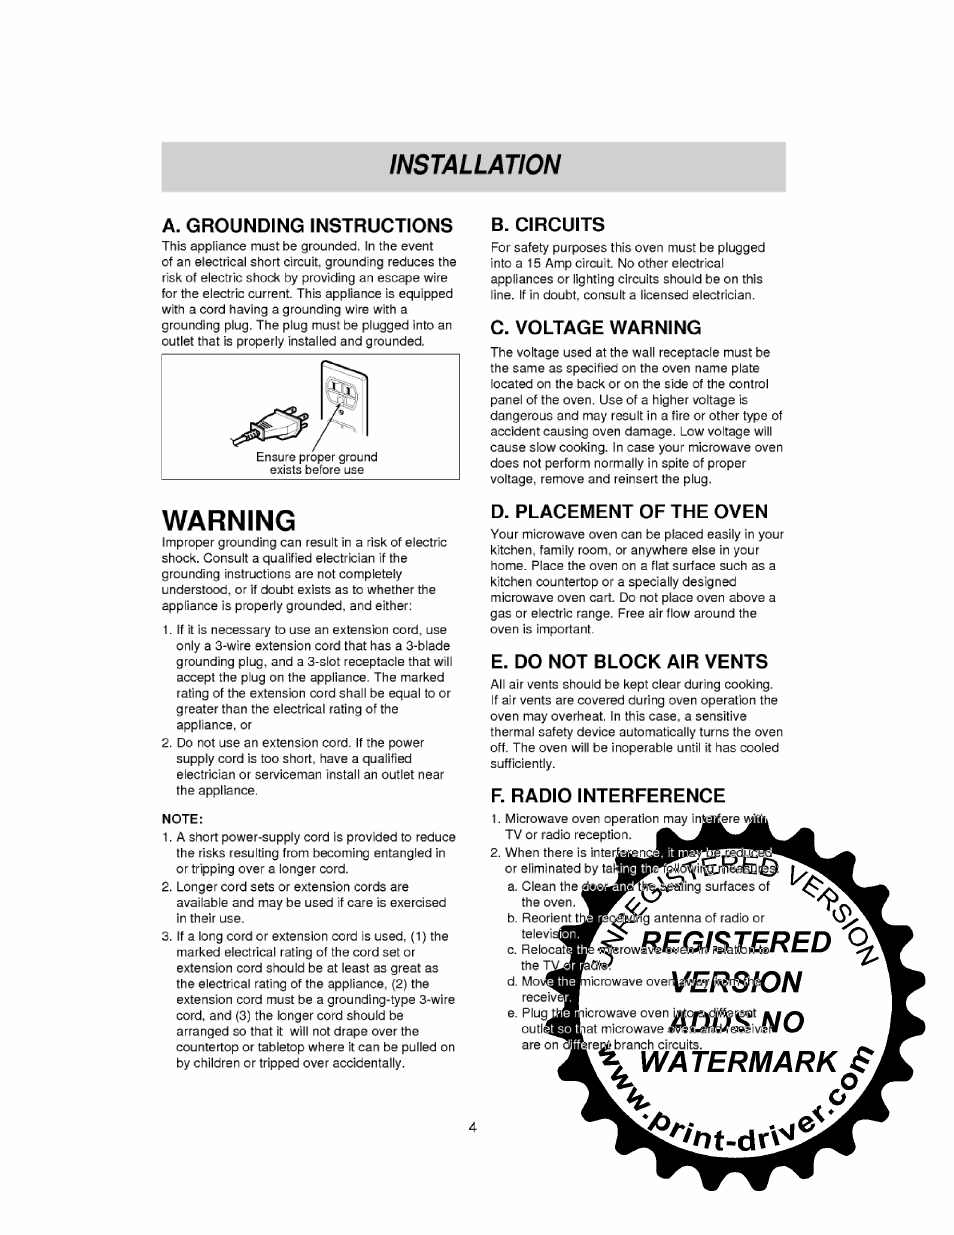 A. grounding instructions, B. circuits, C. voltage warning | D. placement of the oven, E. do not block air vents, F. radio interference, Watermark si, Warning, Installation | LG MS-0745V User Manual | Page 4 / 19